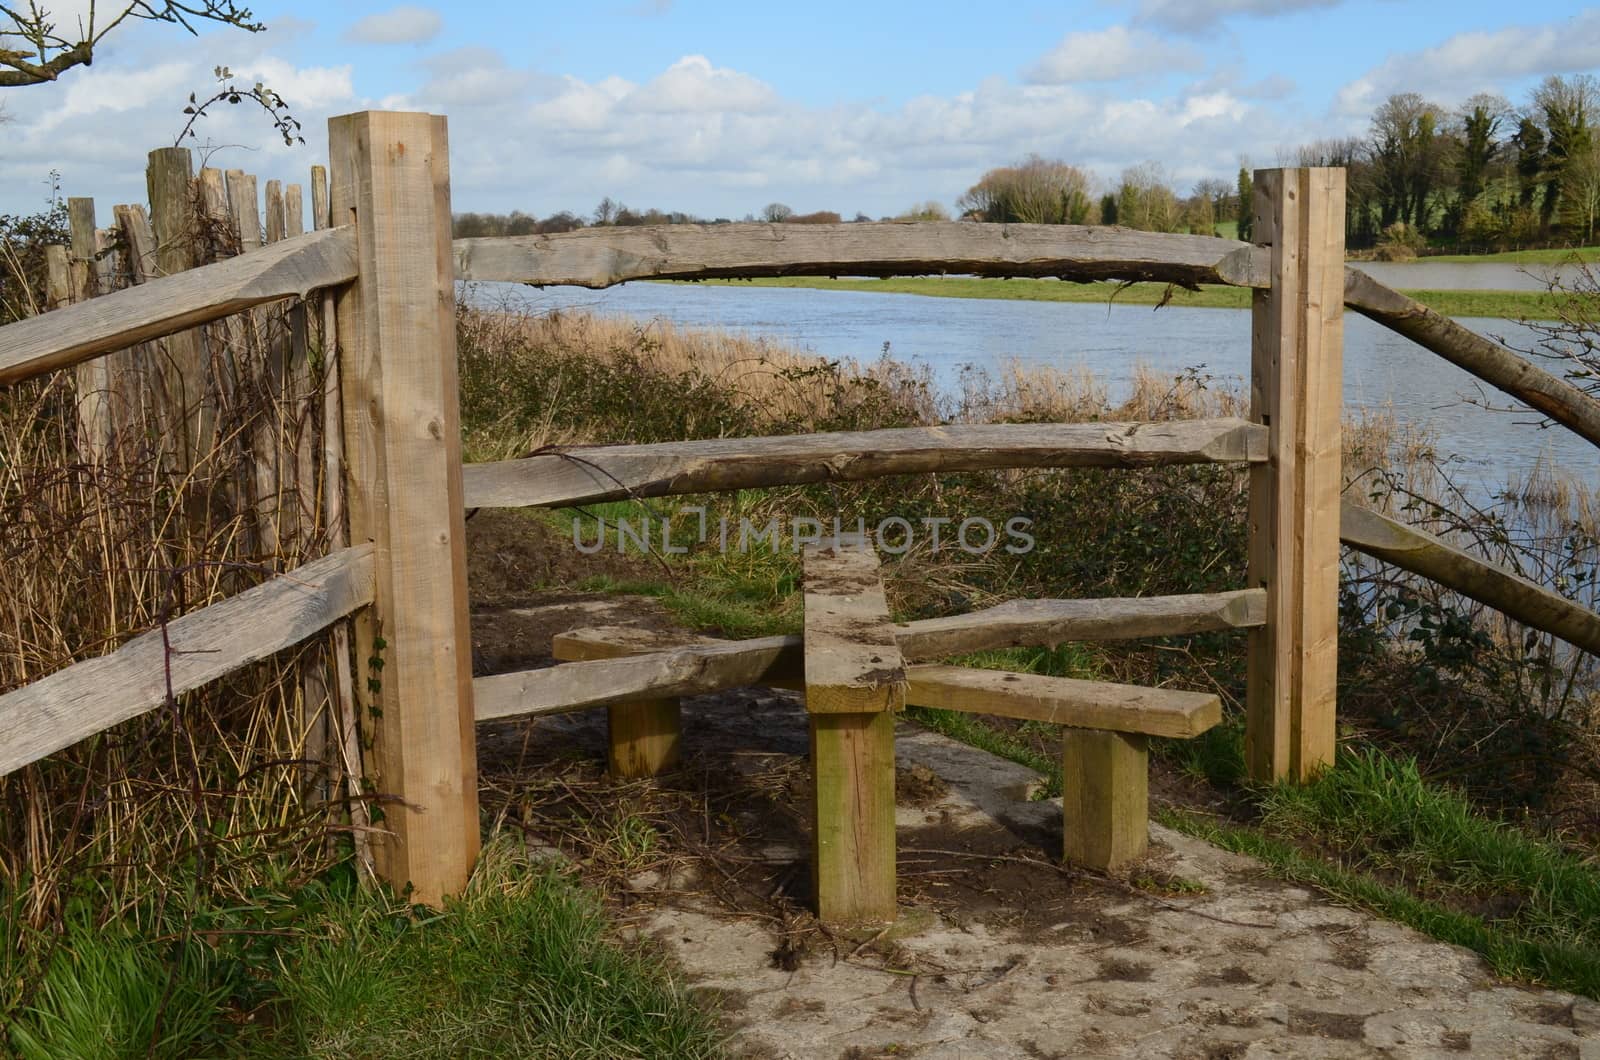 Wooden stile gate next to a river.